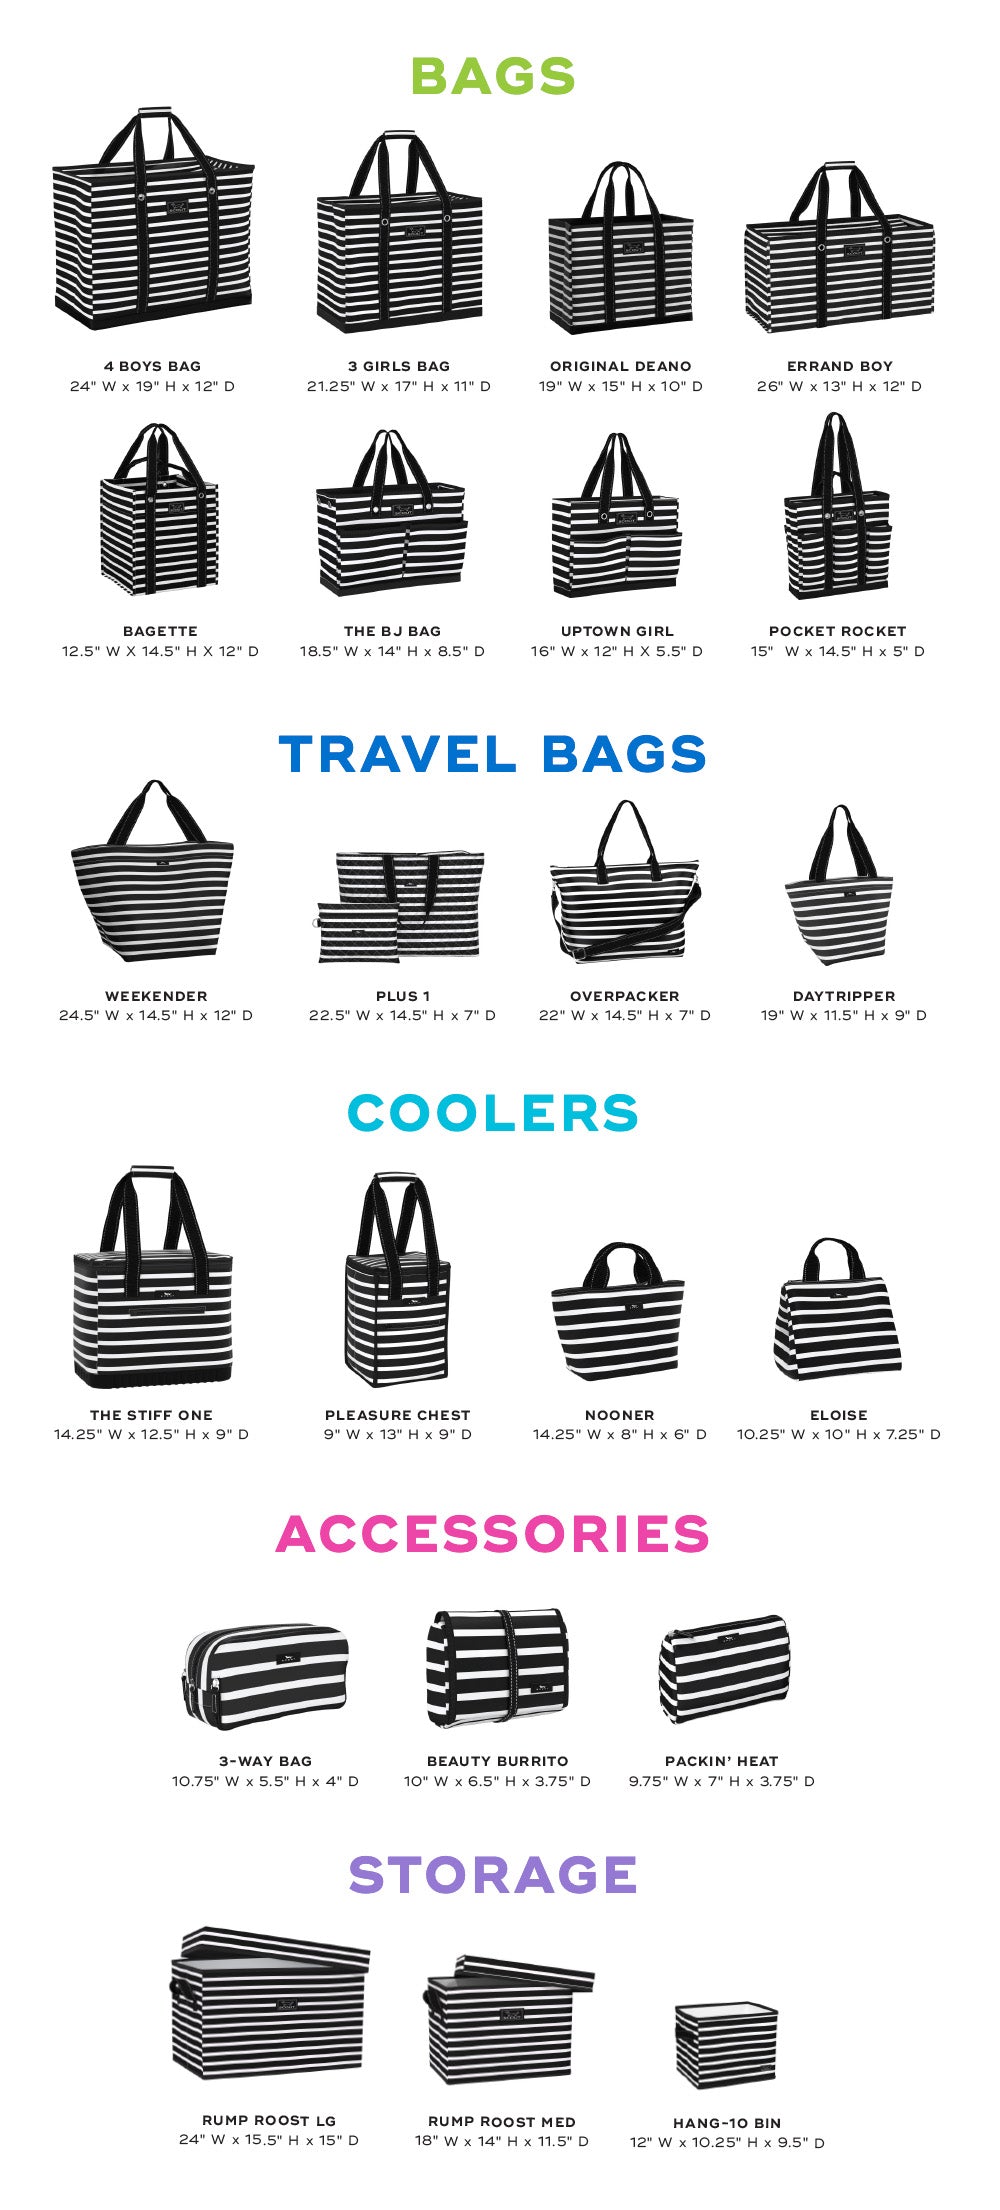 Bag Allowance and Dimensions